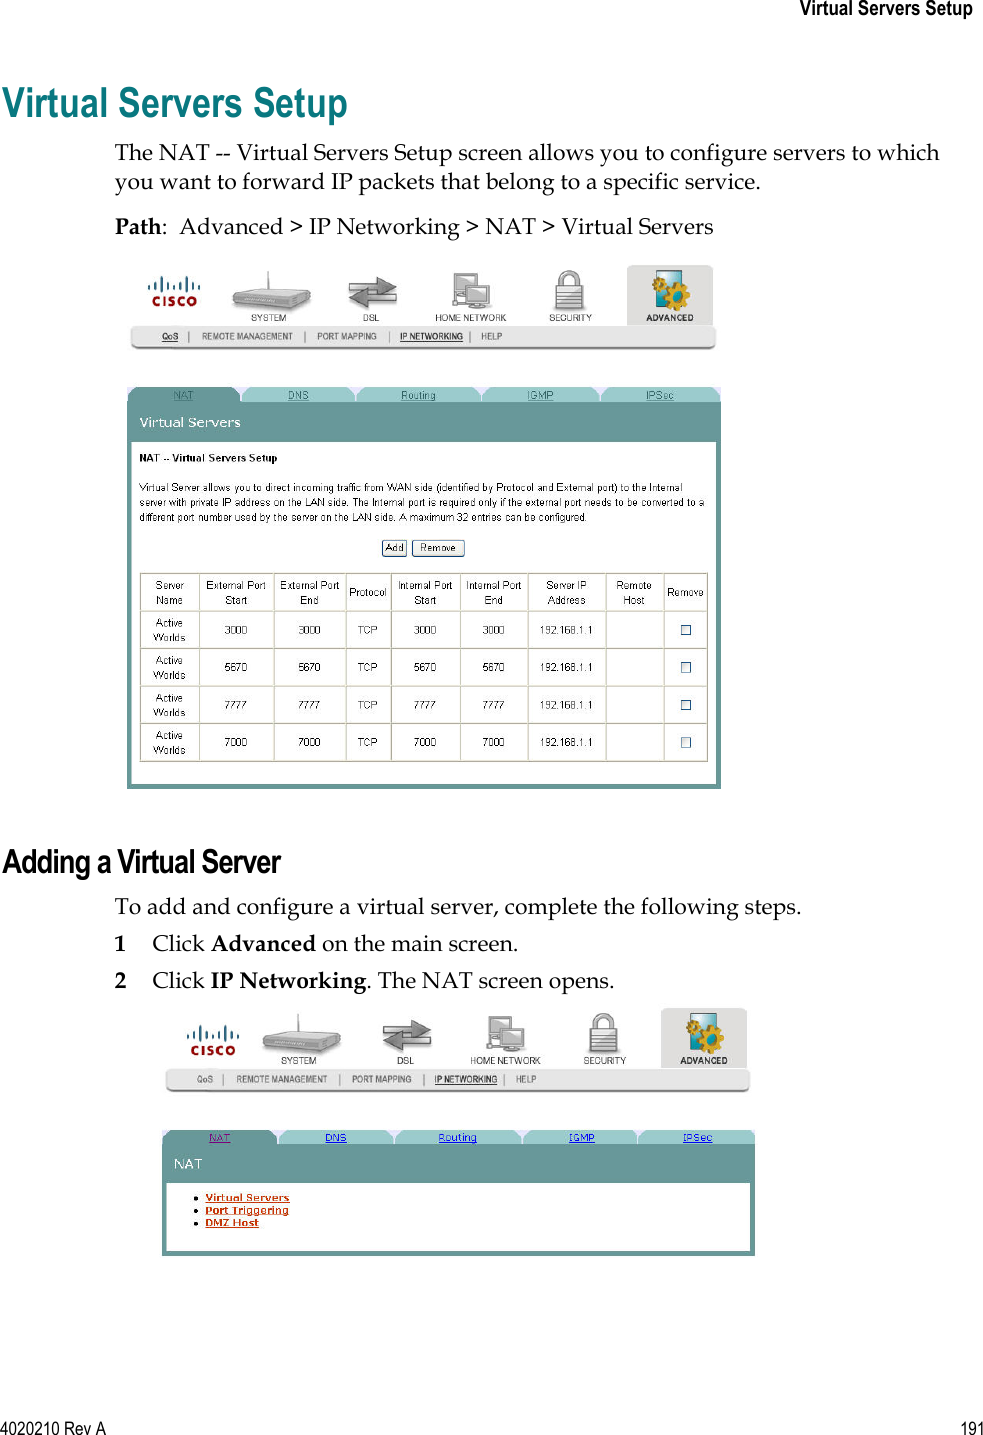   Virtual Servers Setup 4020210 Rev A 191  Virtual Servers Setup The NAT -- Virtual Servers Setup screen allows you to configure servers to which you want to forward IP packets that belong to a specific service. Path:  Advanced &gt; IP Networking &gt; NAT &gt; Virtual Servers   Adding a Virtual Server To add and configure a virtual server, complete the following steps.  1 Click Advanced on the main screen. 2 Click IP Networking. The NAT screen opens.  